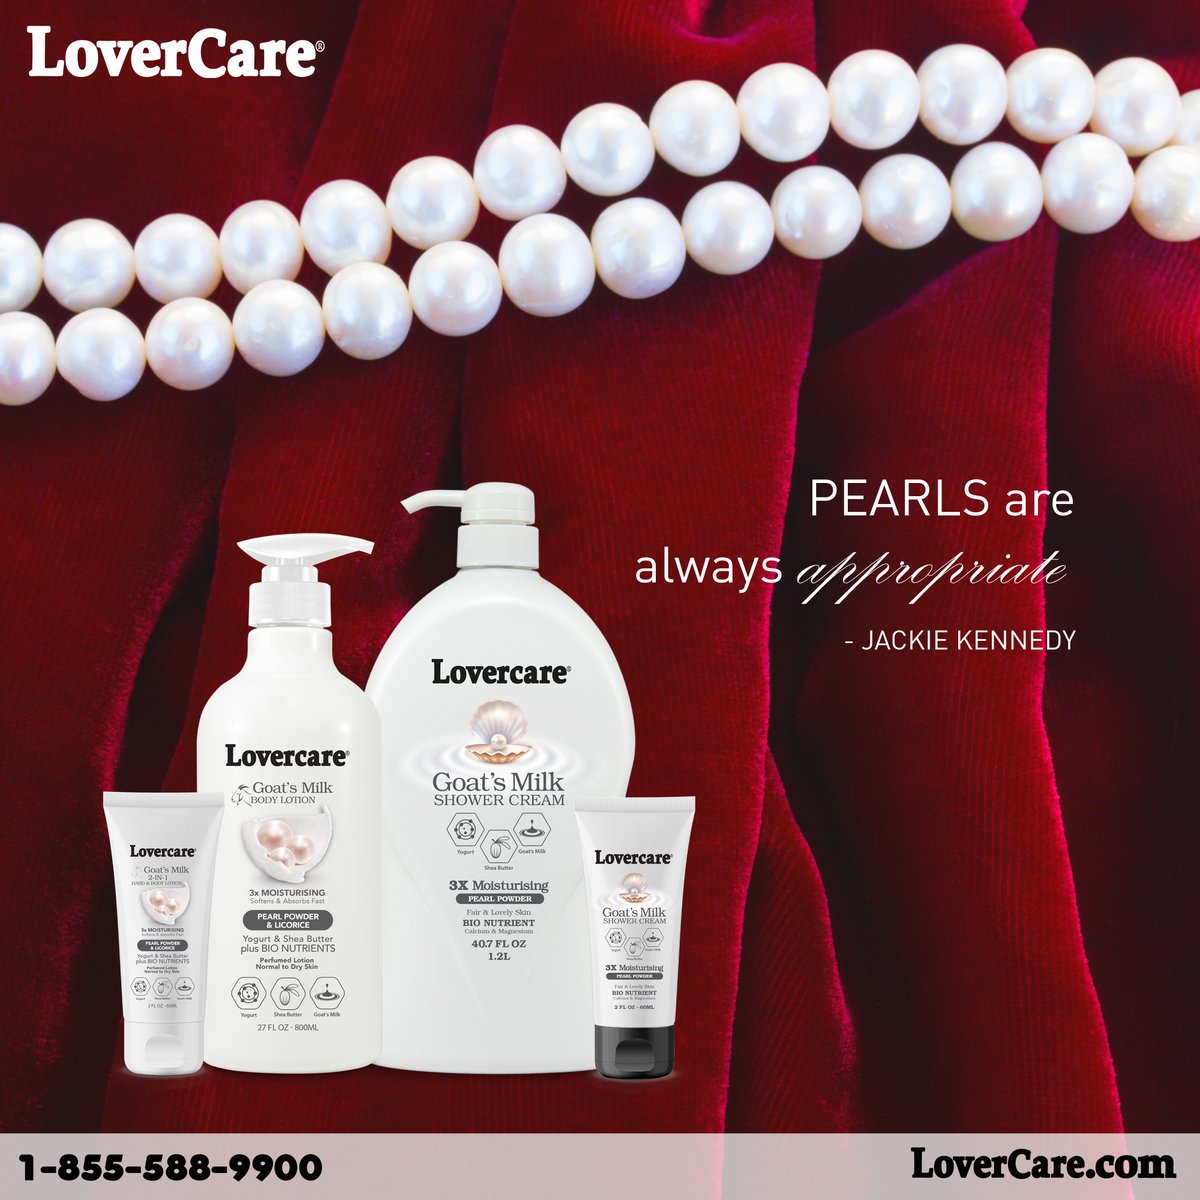 👩Pearl powder & licorice are renowned for their exceptional benefits to the skin. Pearl powder, rich in amino acids, minerals, & antioxidants, enhances skin regeneration, improves elasticity, and imparts a natural radiance. bit.ly/3I4Y1Hi #bodywash #showergel #lovecare